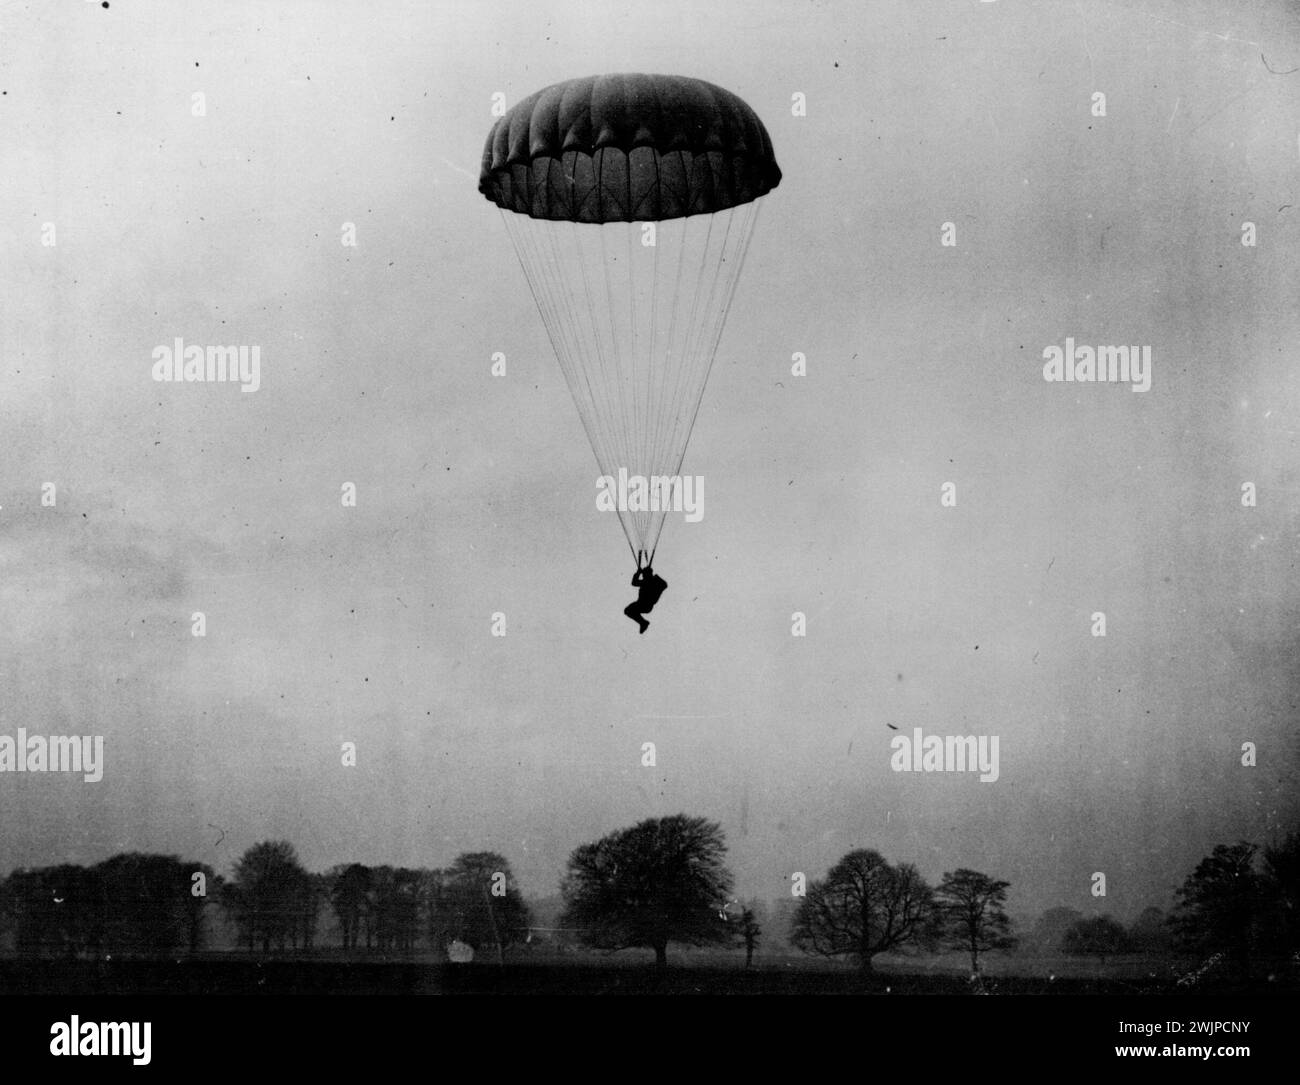 These pictures of parachute troops under instruction have been obtained at a secret R.A.F. station in Britain where the army and air force are collaborating in training. One of the parachute troops about to land. The man is controlling his direction of landing and has his knees raised ready for shock of landing. July 20, 1955 Stock Photo